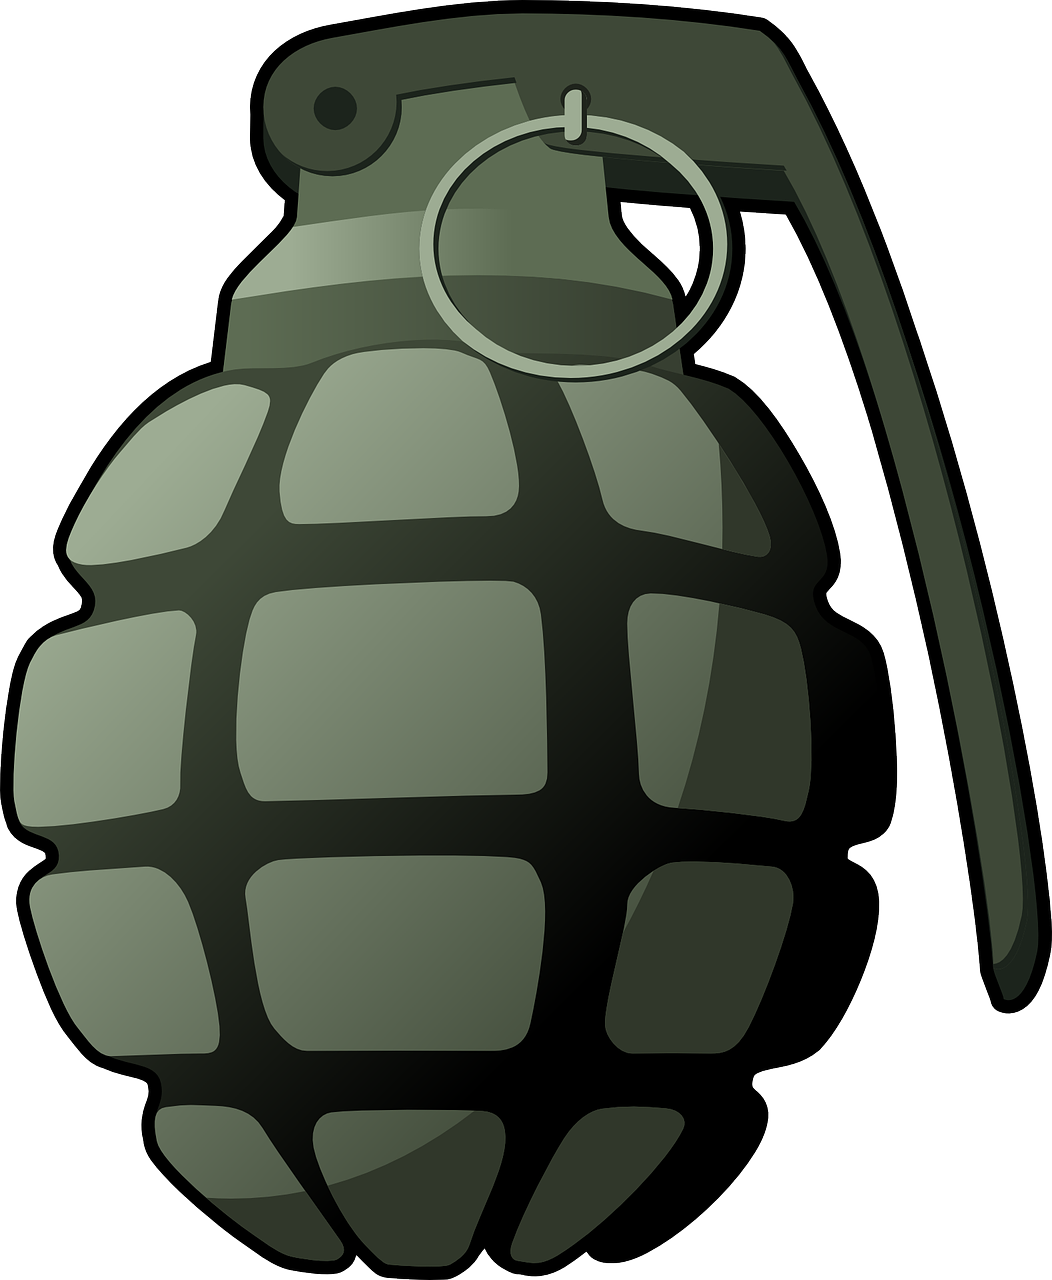 hand-grenade-g43ad8770a_1280.png